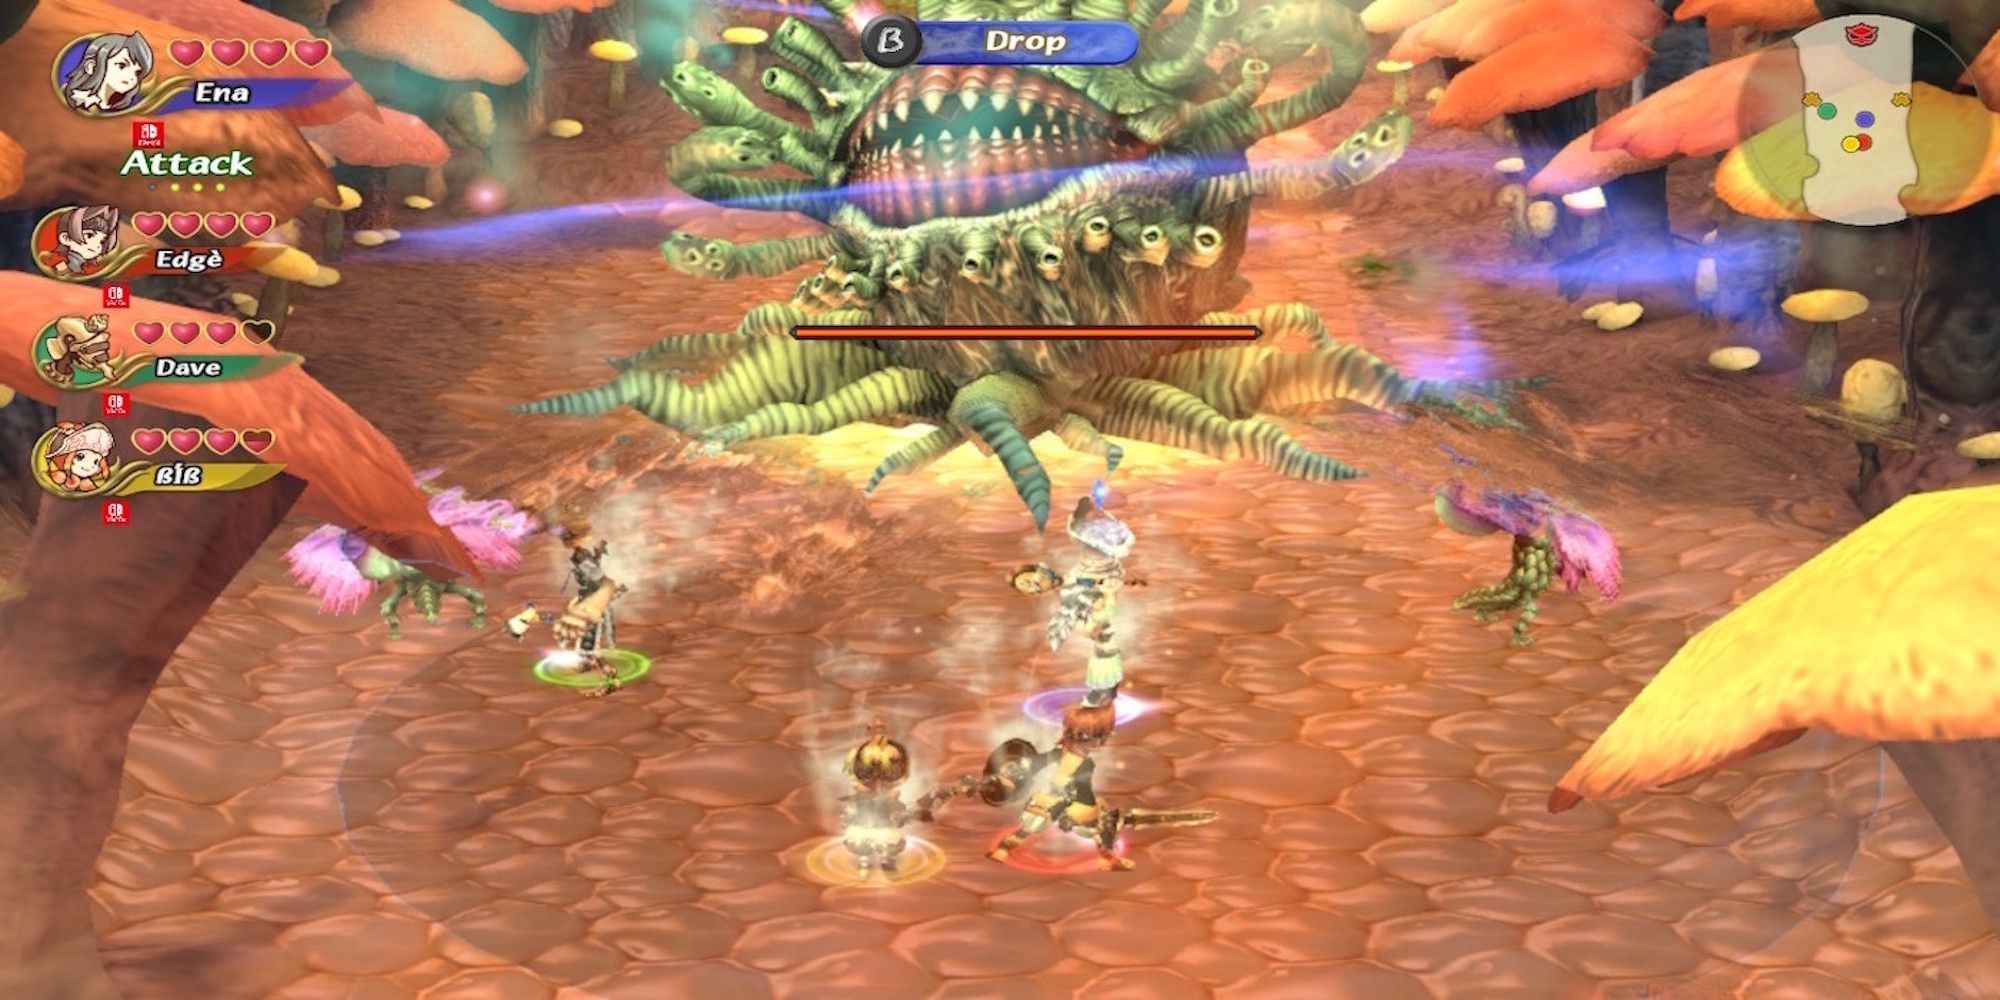 Fighting a boss in Final Fantasy Crystal Chronicles